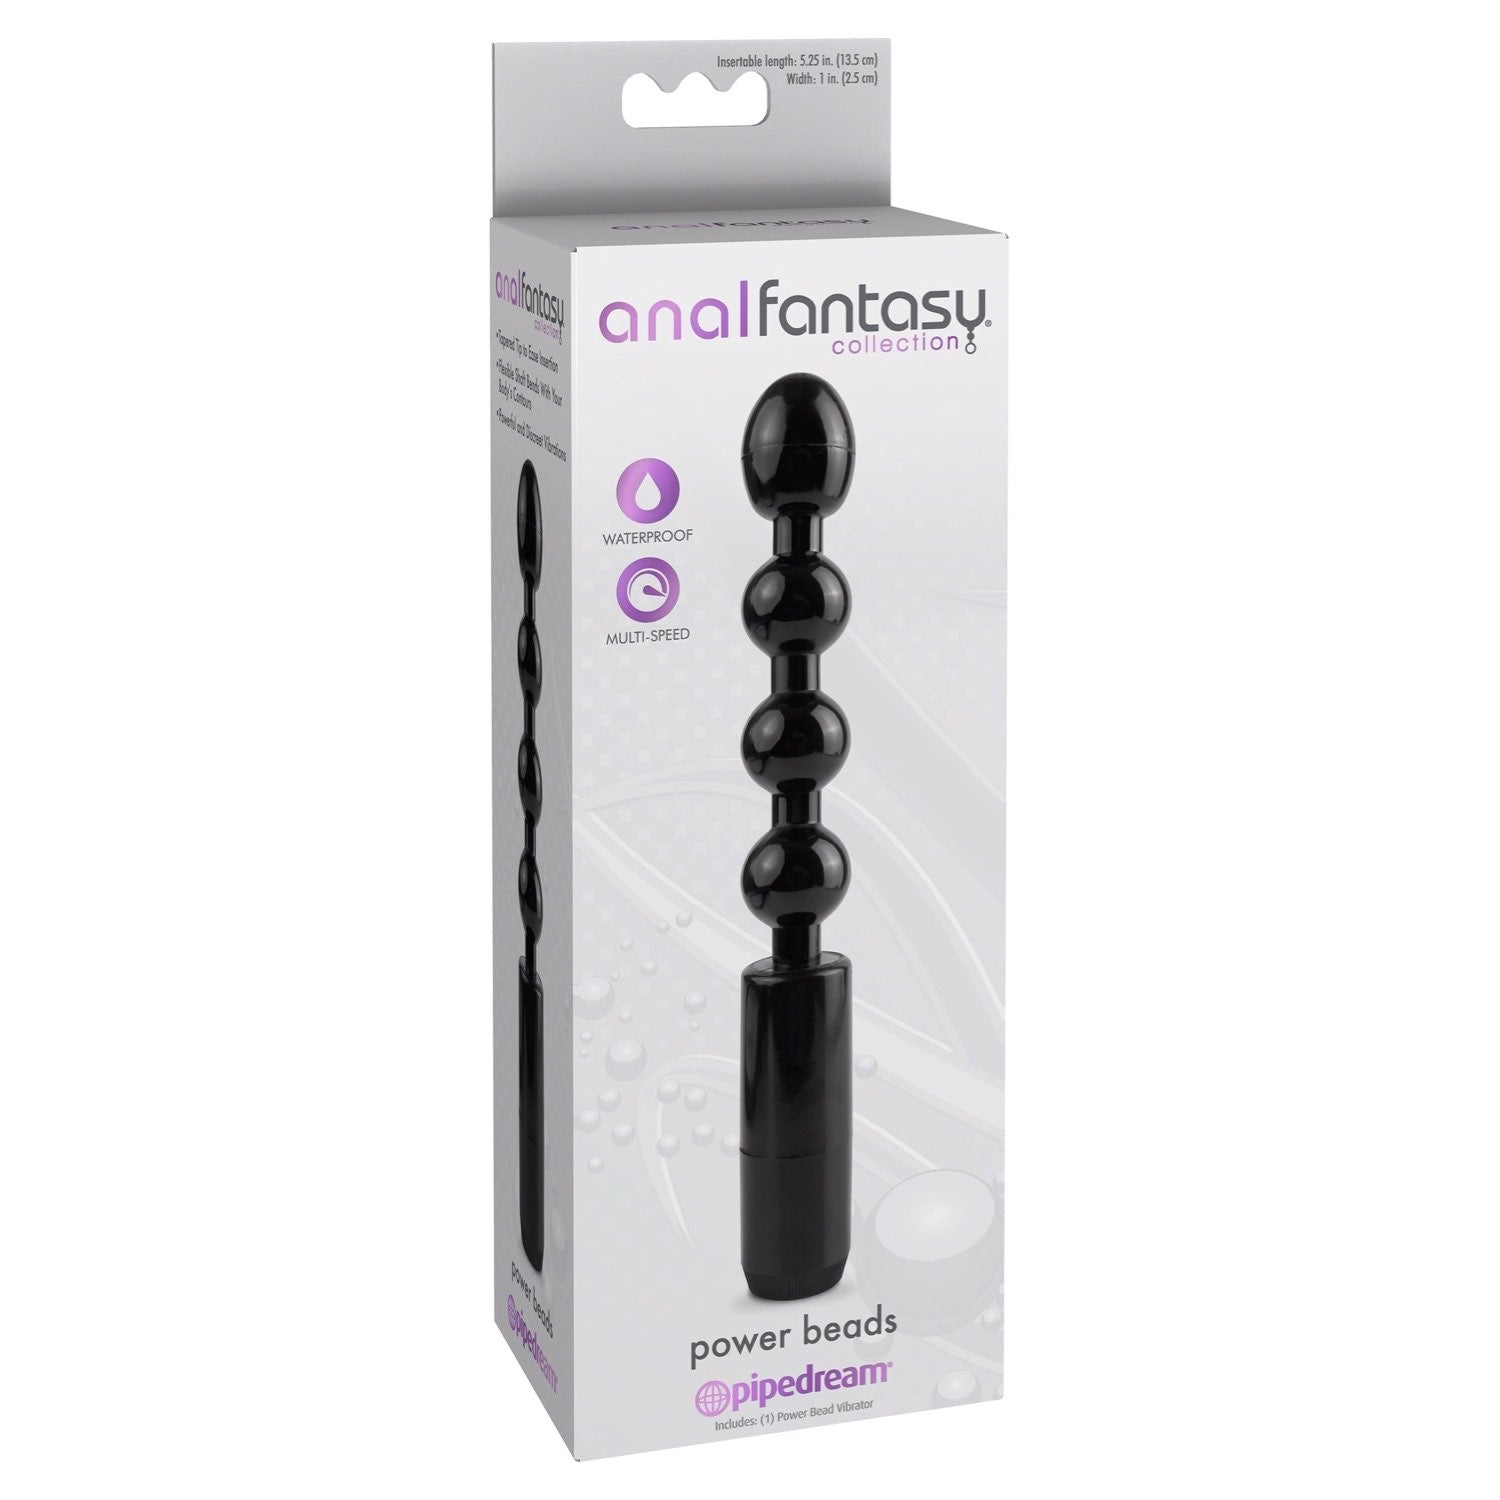 Anal Fantasy Collection Power Beads - Black 12 cm (4.75&quot;) Vibrating Anal Cord by Pipedream